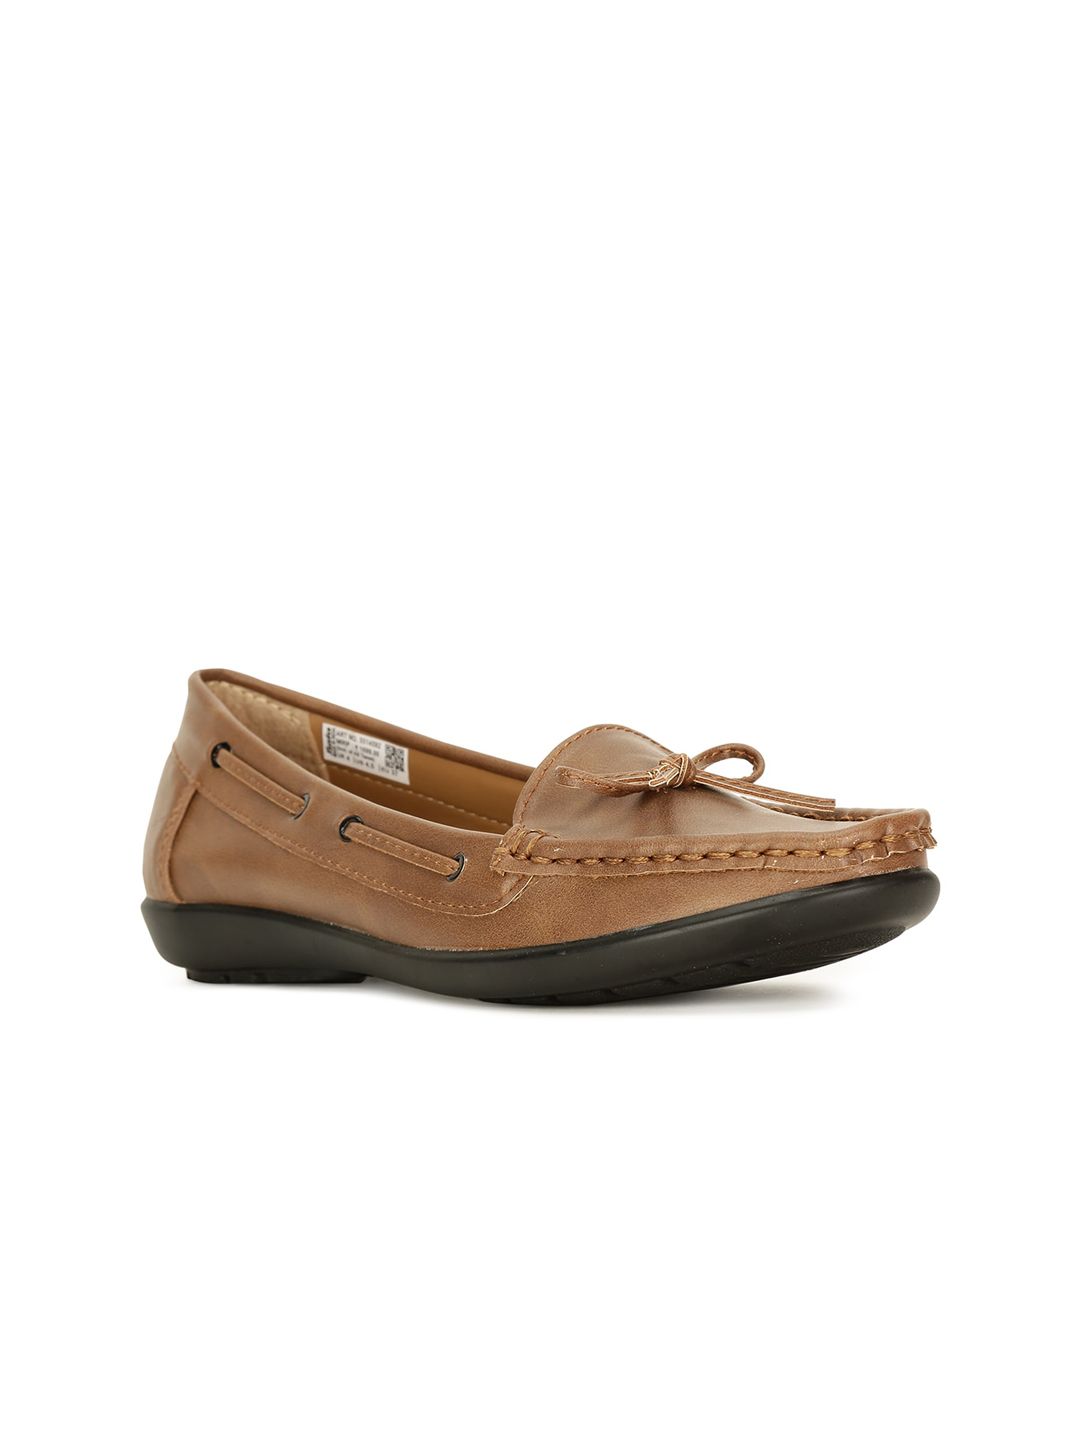 Bata Women Brown Boat Shoes Price in India